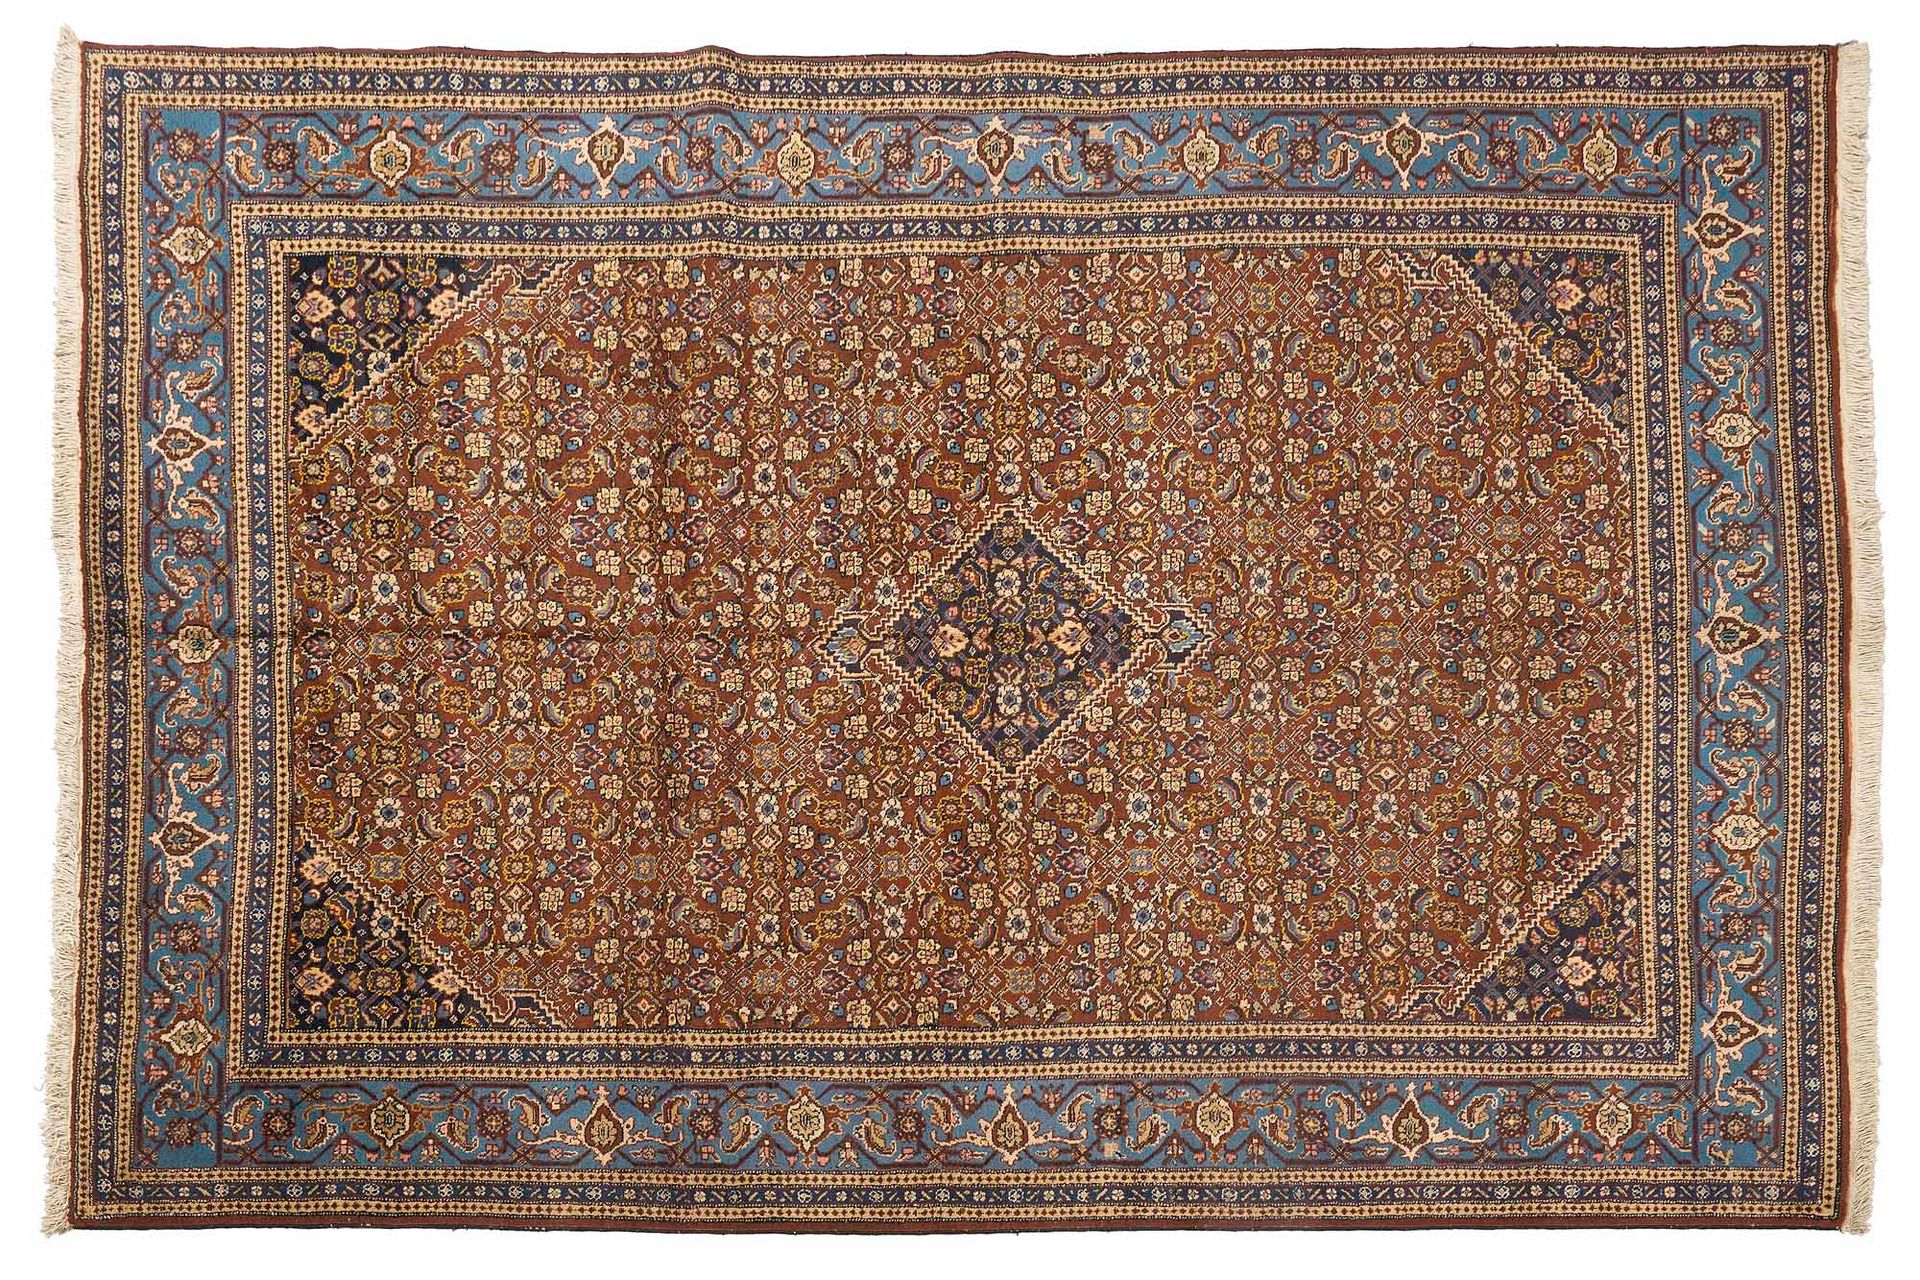 Null MÉCHKINE carpet (Iran), middle of the 20th century

Dimensions : 355 x 246c&hellip;